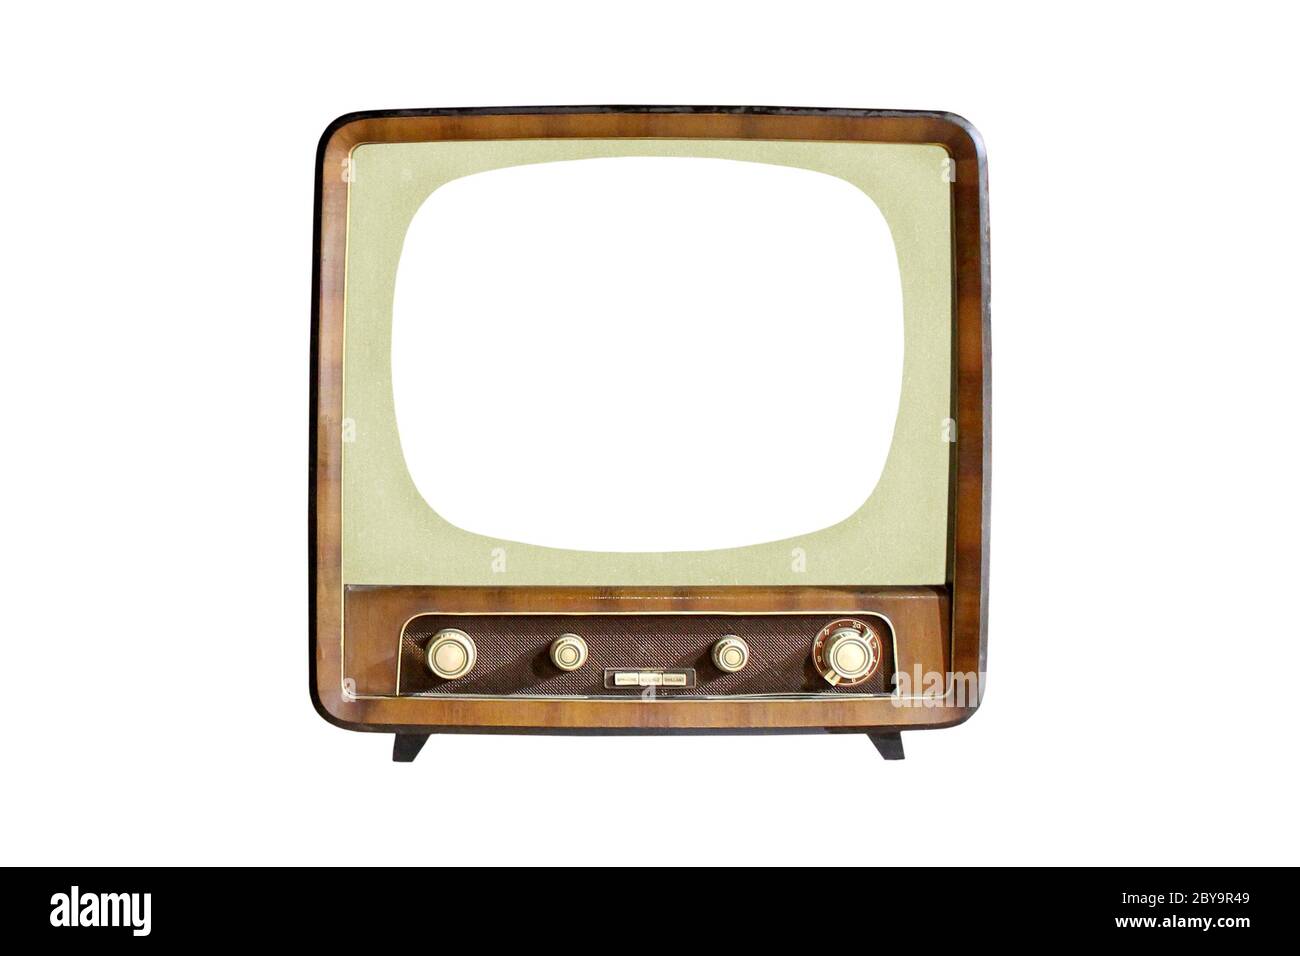 Vintage CRT television set with blank screen isolated on white background, retro analog television technology Stock Photo